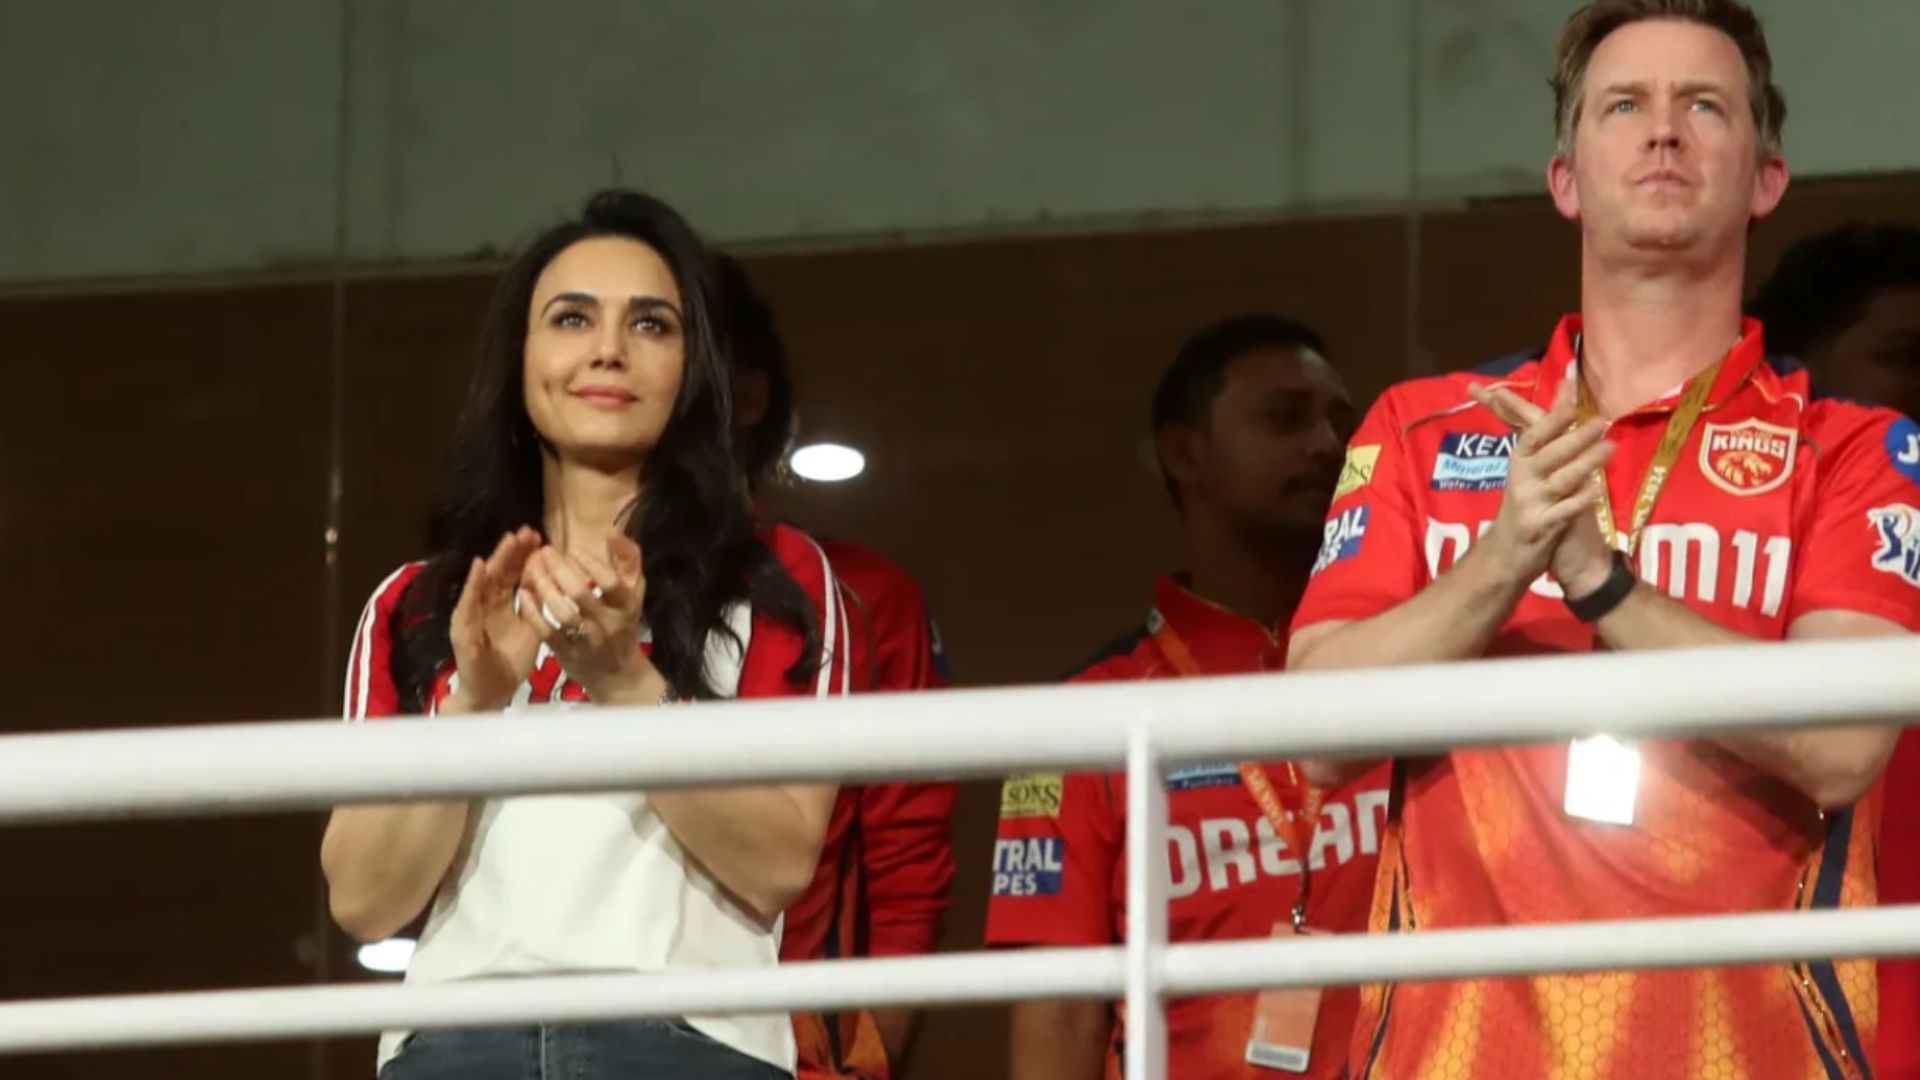 Preity Zinta had a chat session on X with her fans (Image: BCCI/IPL)